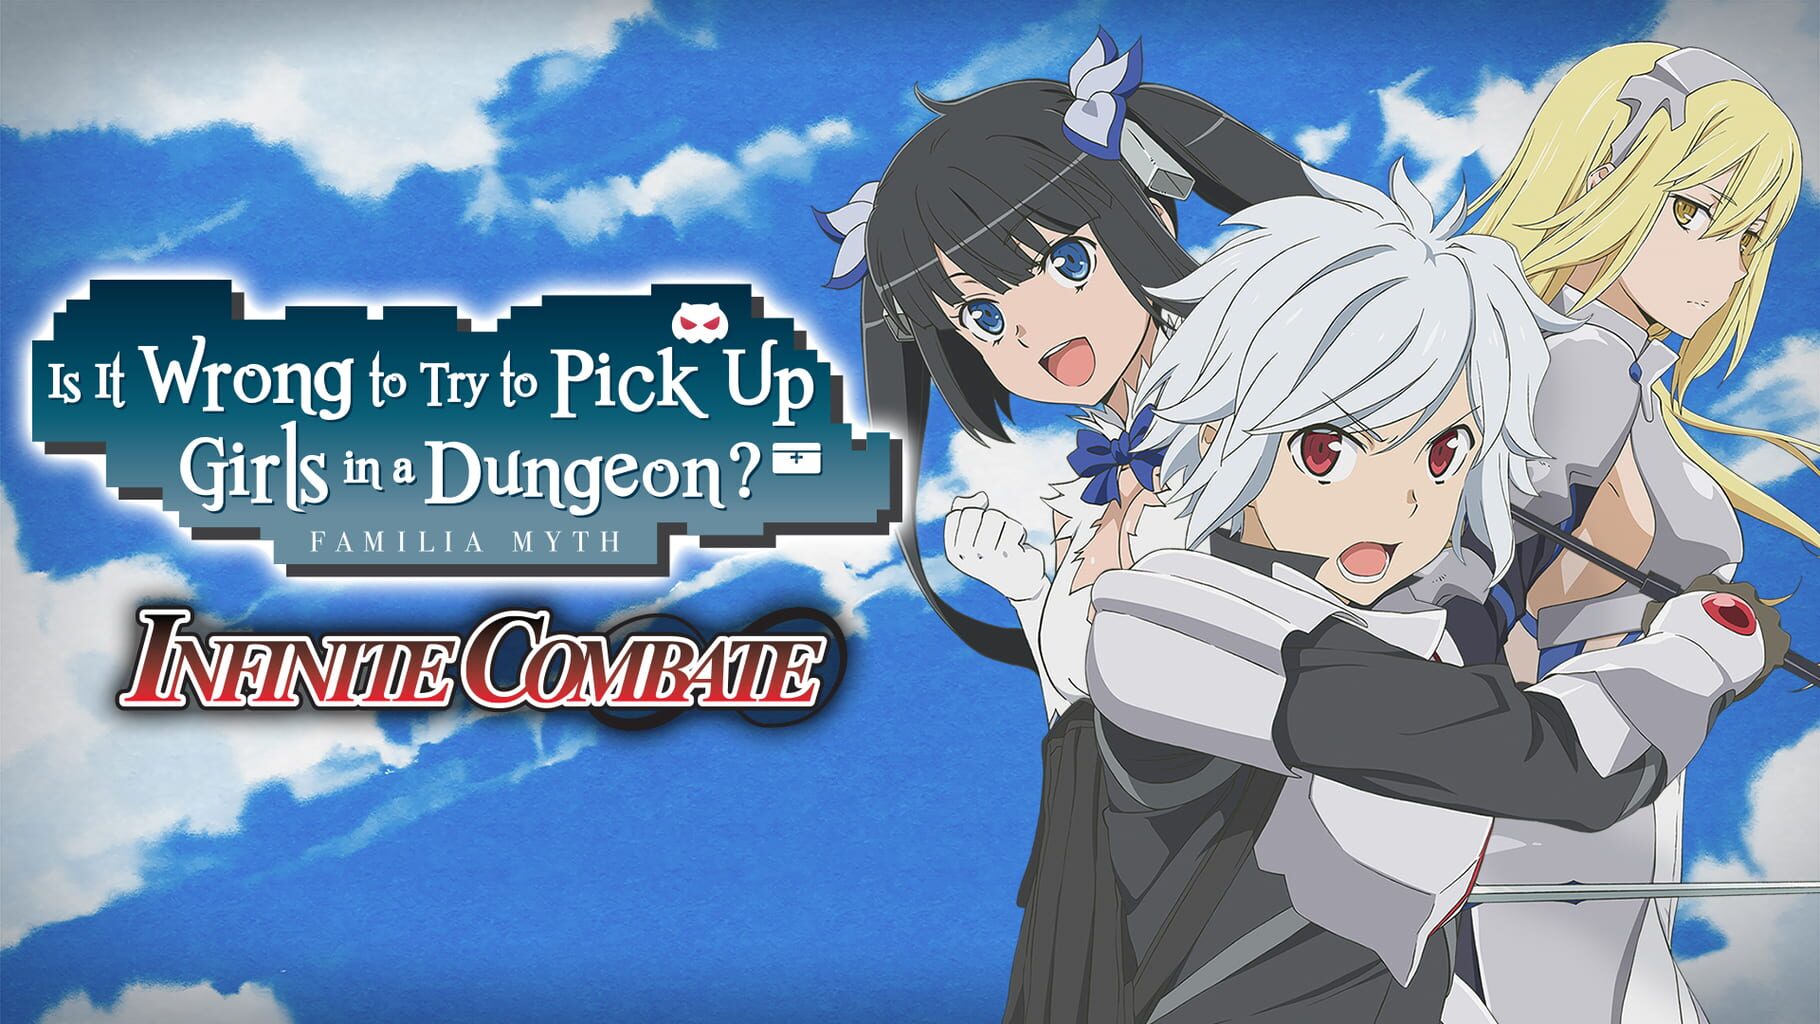 Is It Wrong to Try to Pick Up Girls in a Dungeon? Infinite Combate artwork